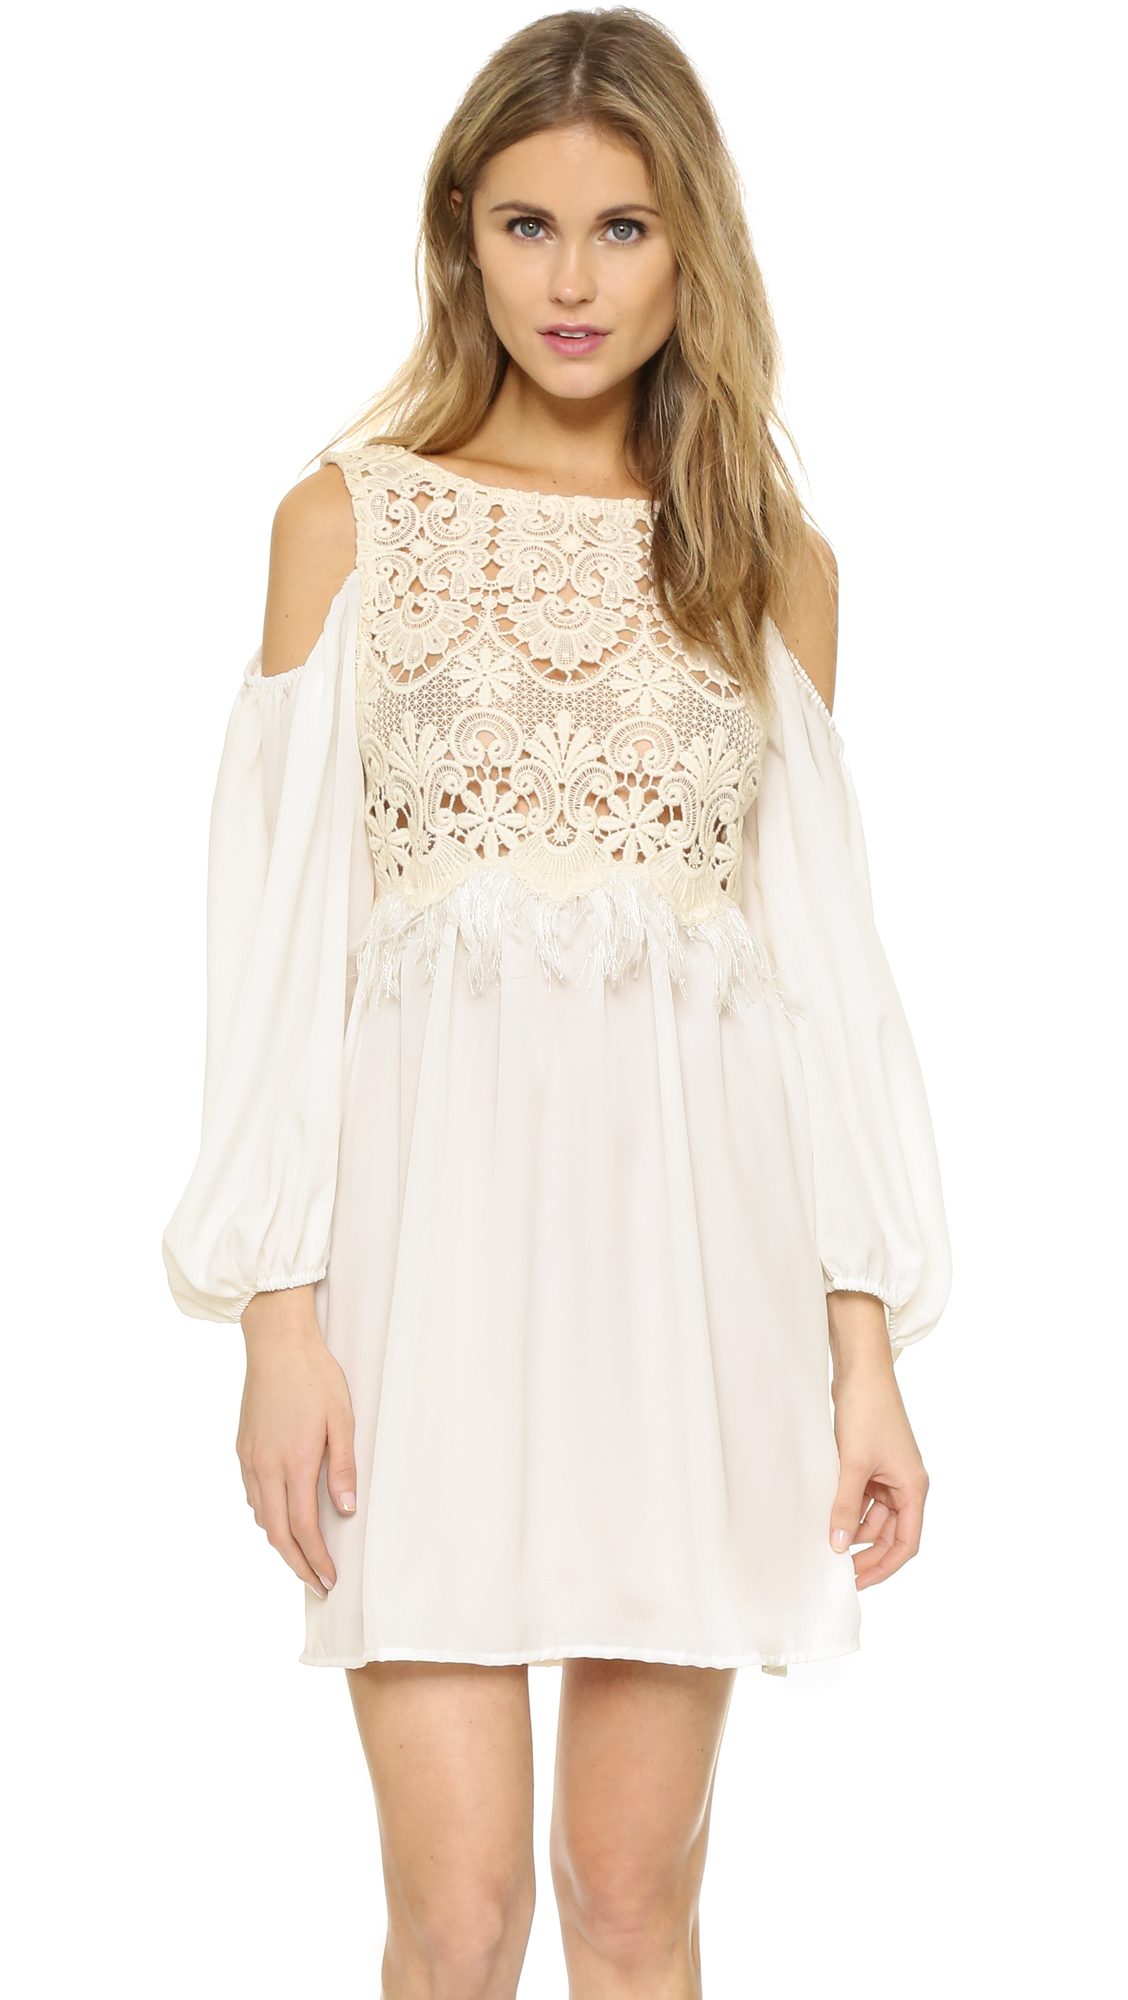 Lyst - Chio Lace Fringe Dress in Pink